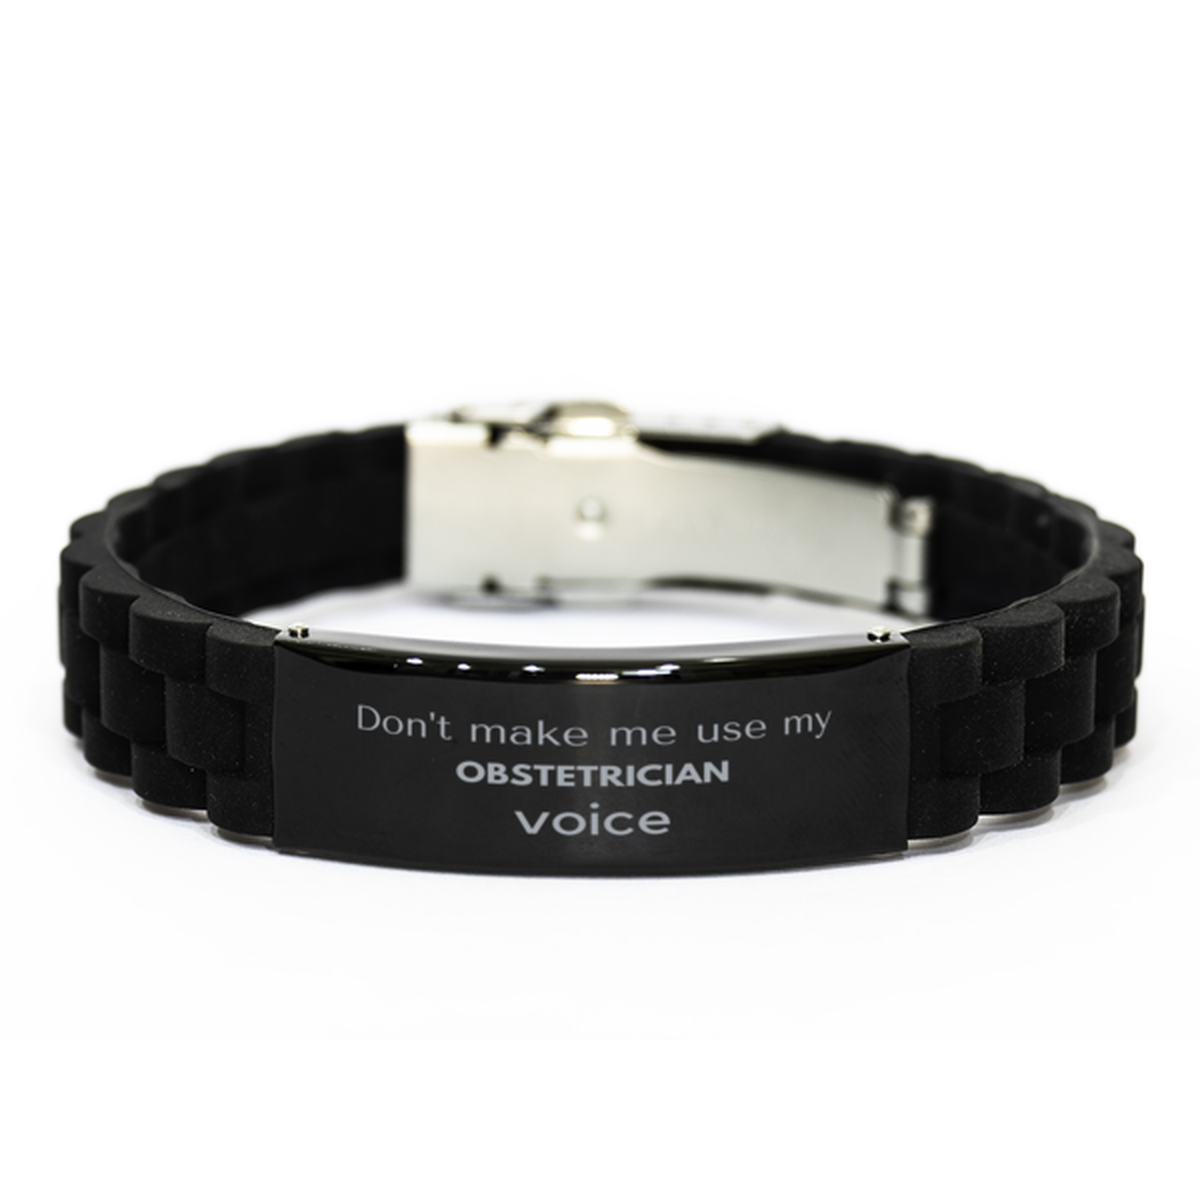 Don't make me use my Obstetrician voice, Sarcasm Obstetrician Gifts, Christmas Obstetrician Black Glidelock Clasp Bracelet Birthday Unique Gifts For Obstetrician Coworkers, Men, Women, Colleague, Friends